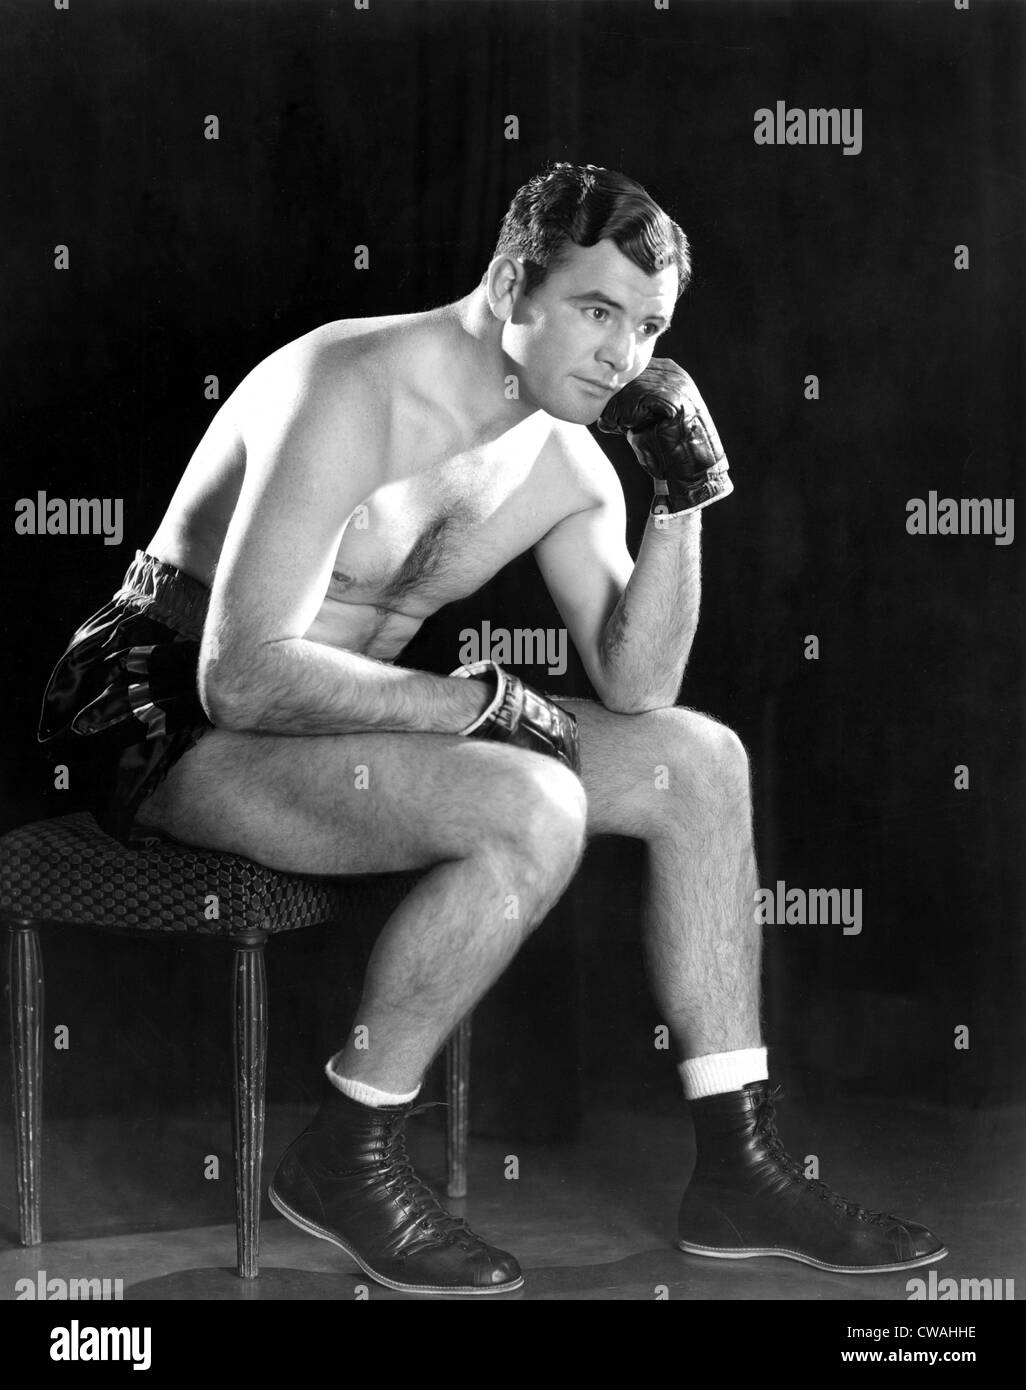 James Braddock in promotional photo for N.B.C. Blue Network radio show  in which he is featured, November 30, 1936. Stock Photo